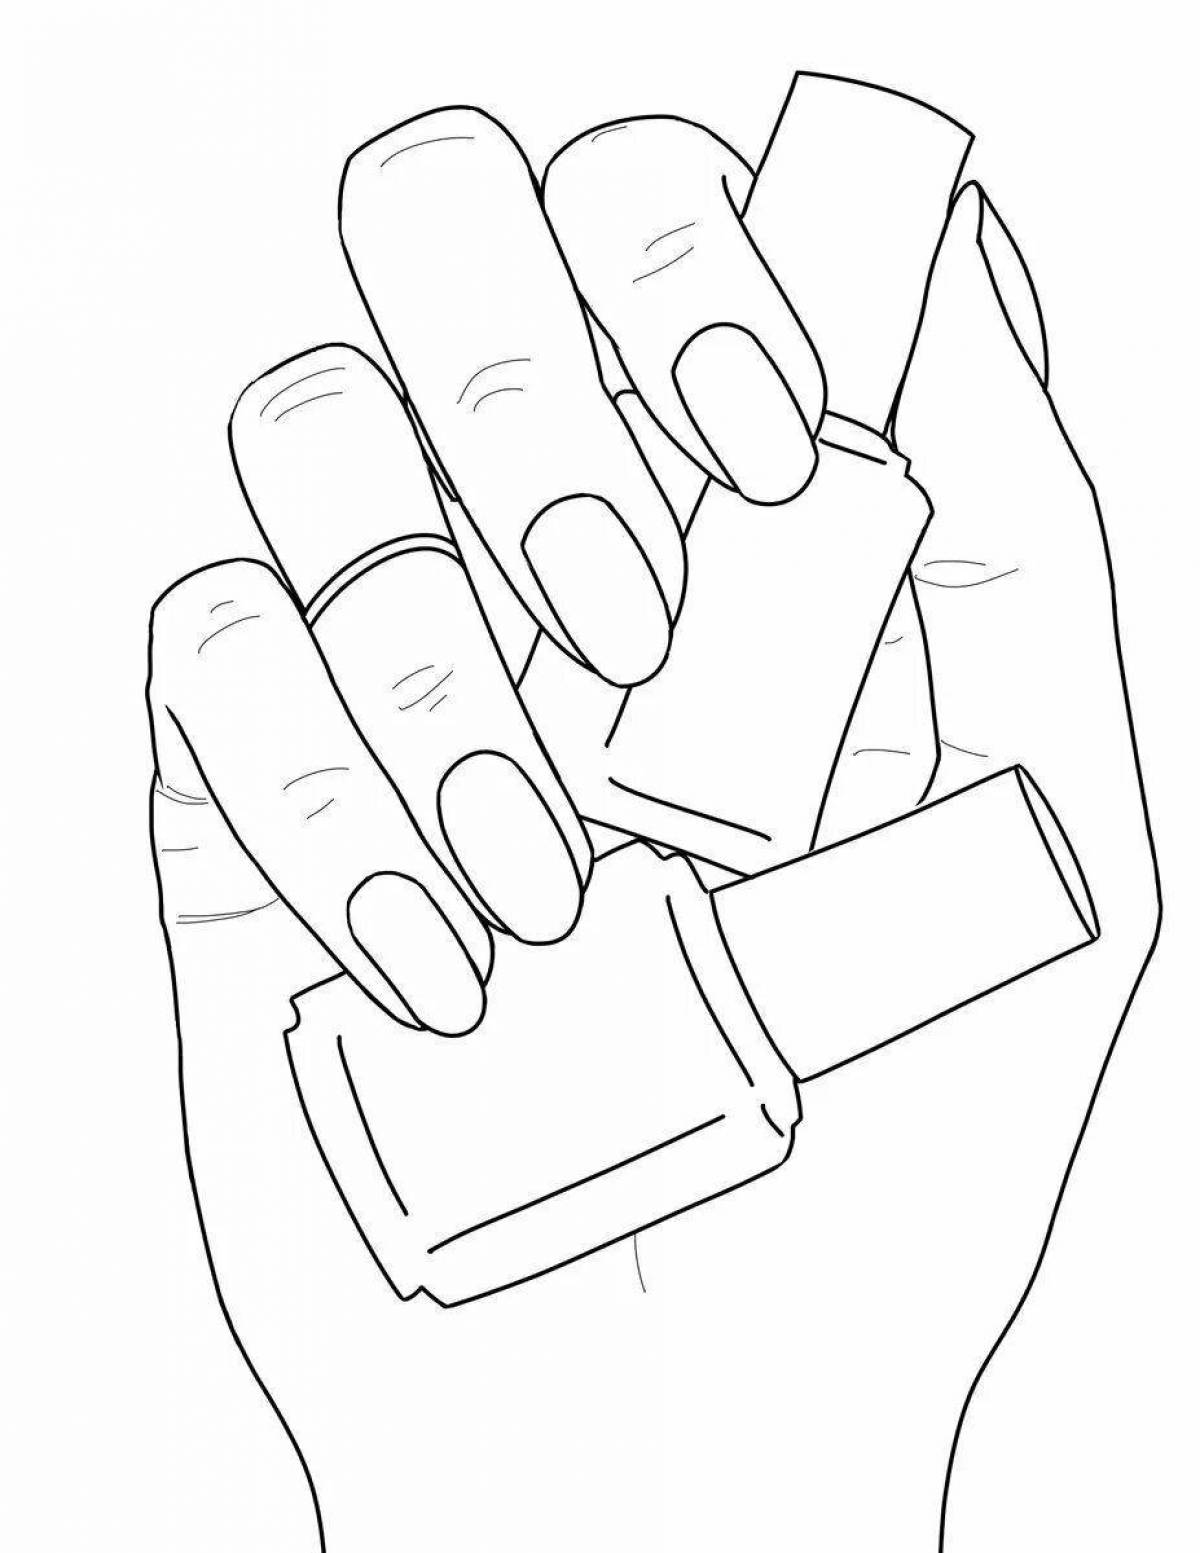 Attractive nail coloring page